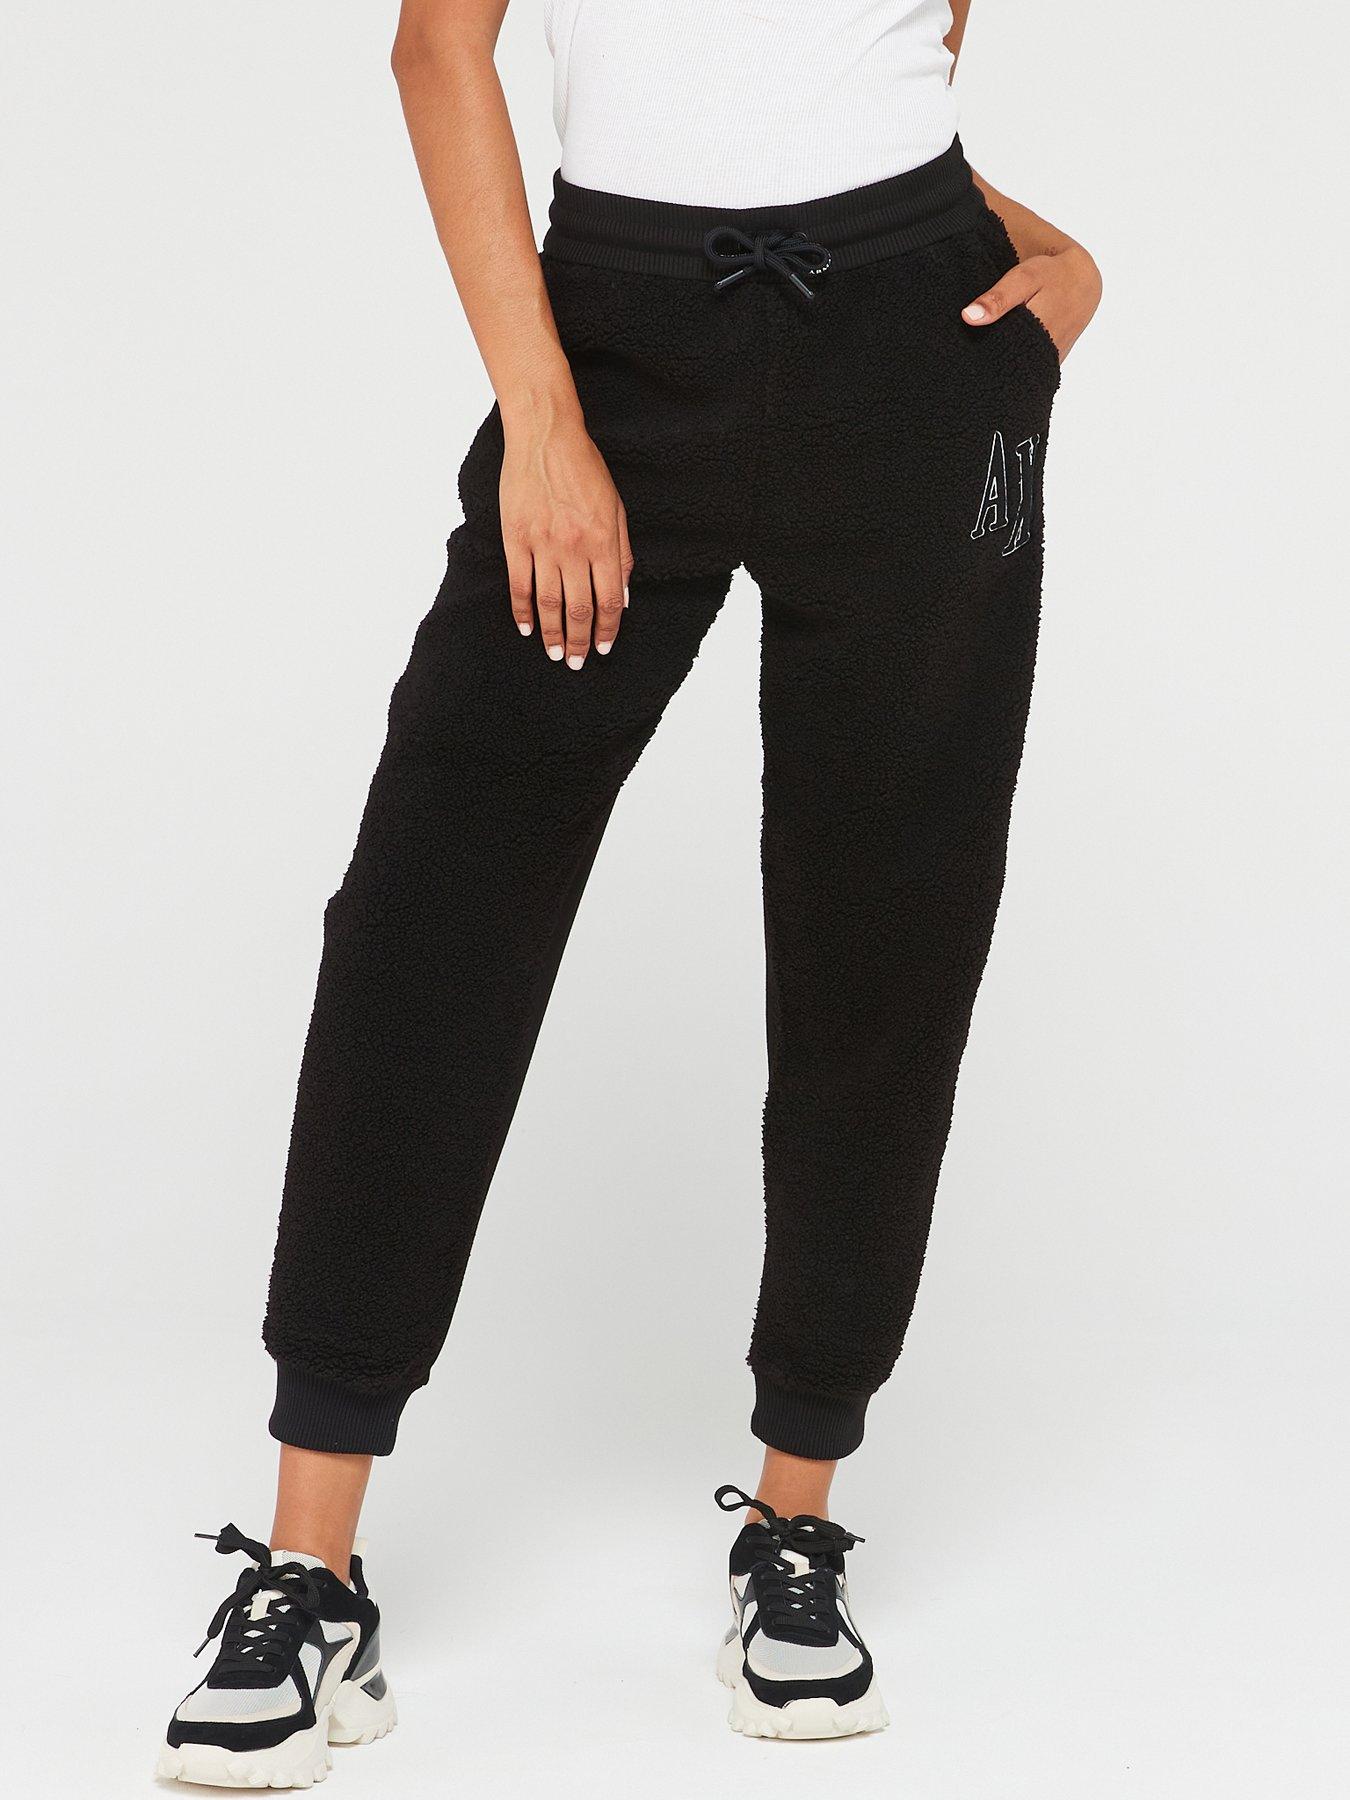 DKNY Velour Luxe Top and Jogger Set - Loungewear from Luxury-Legs